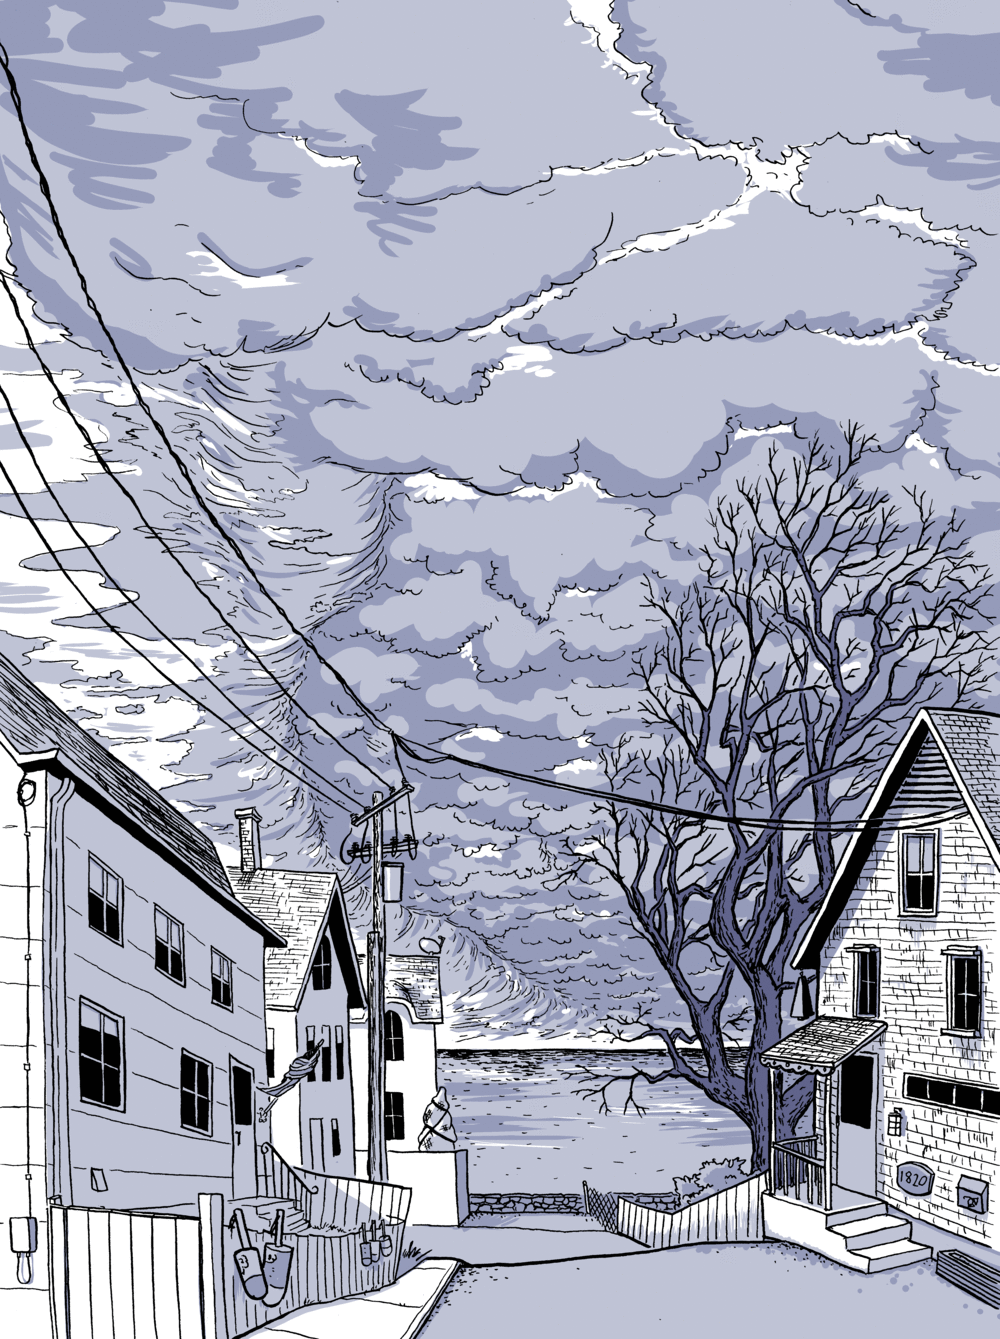 Drawing of a storm gathering outside a coastal town